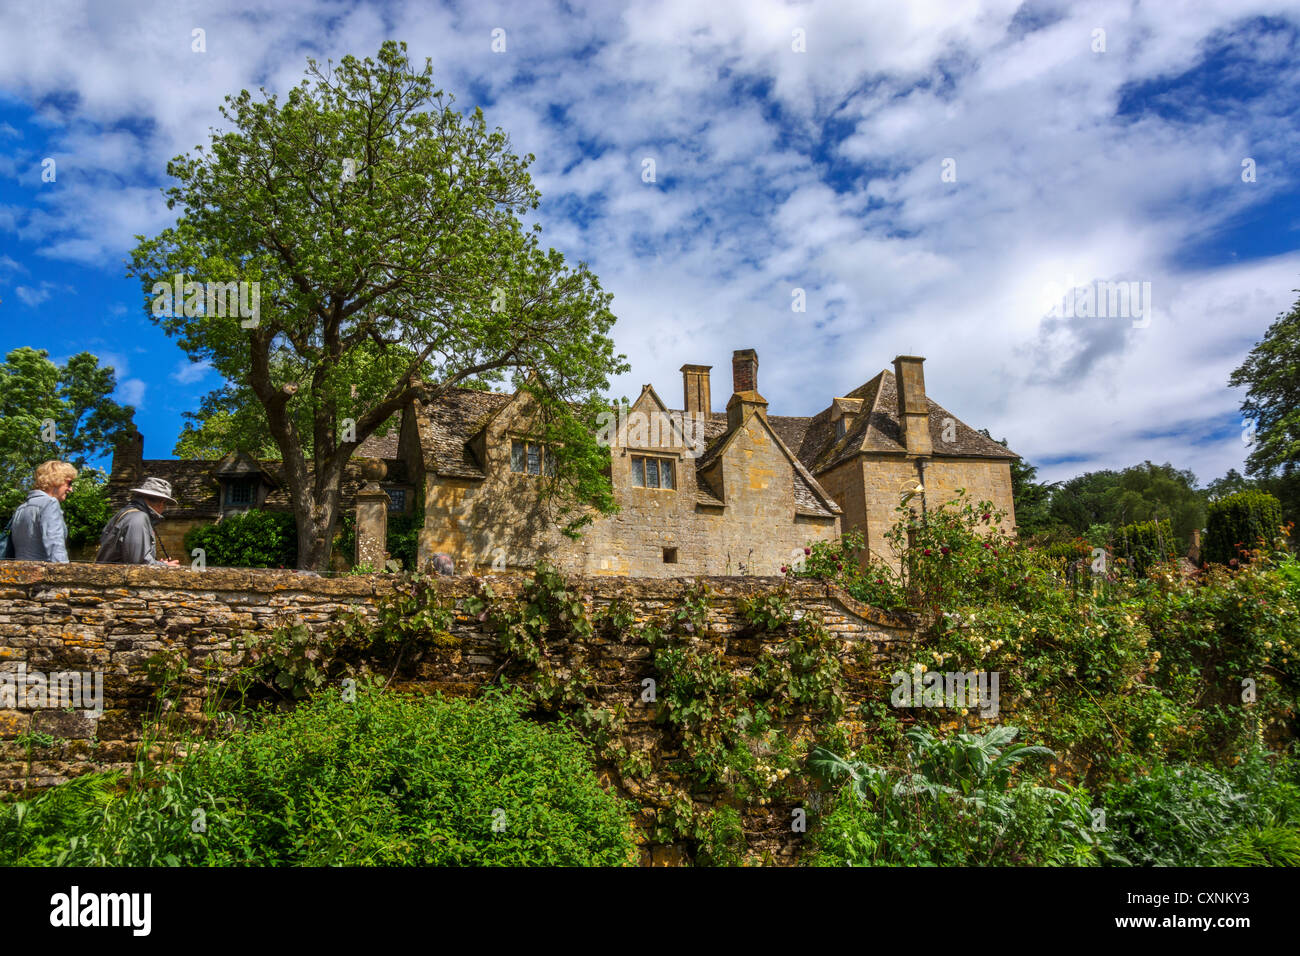 the facade of snowshill manor - a stately home and country house in the cotswolds, gloucestershire, the midlands, england, uk. Stock Photo